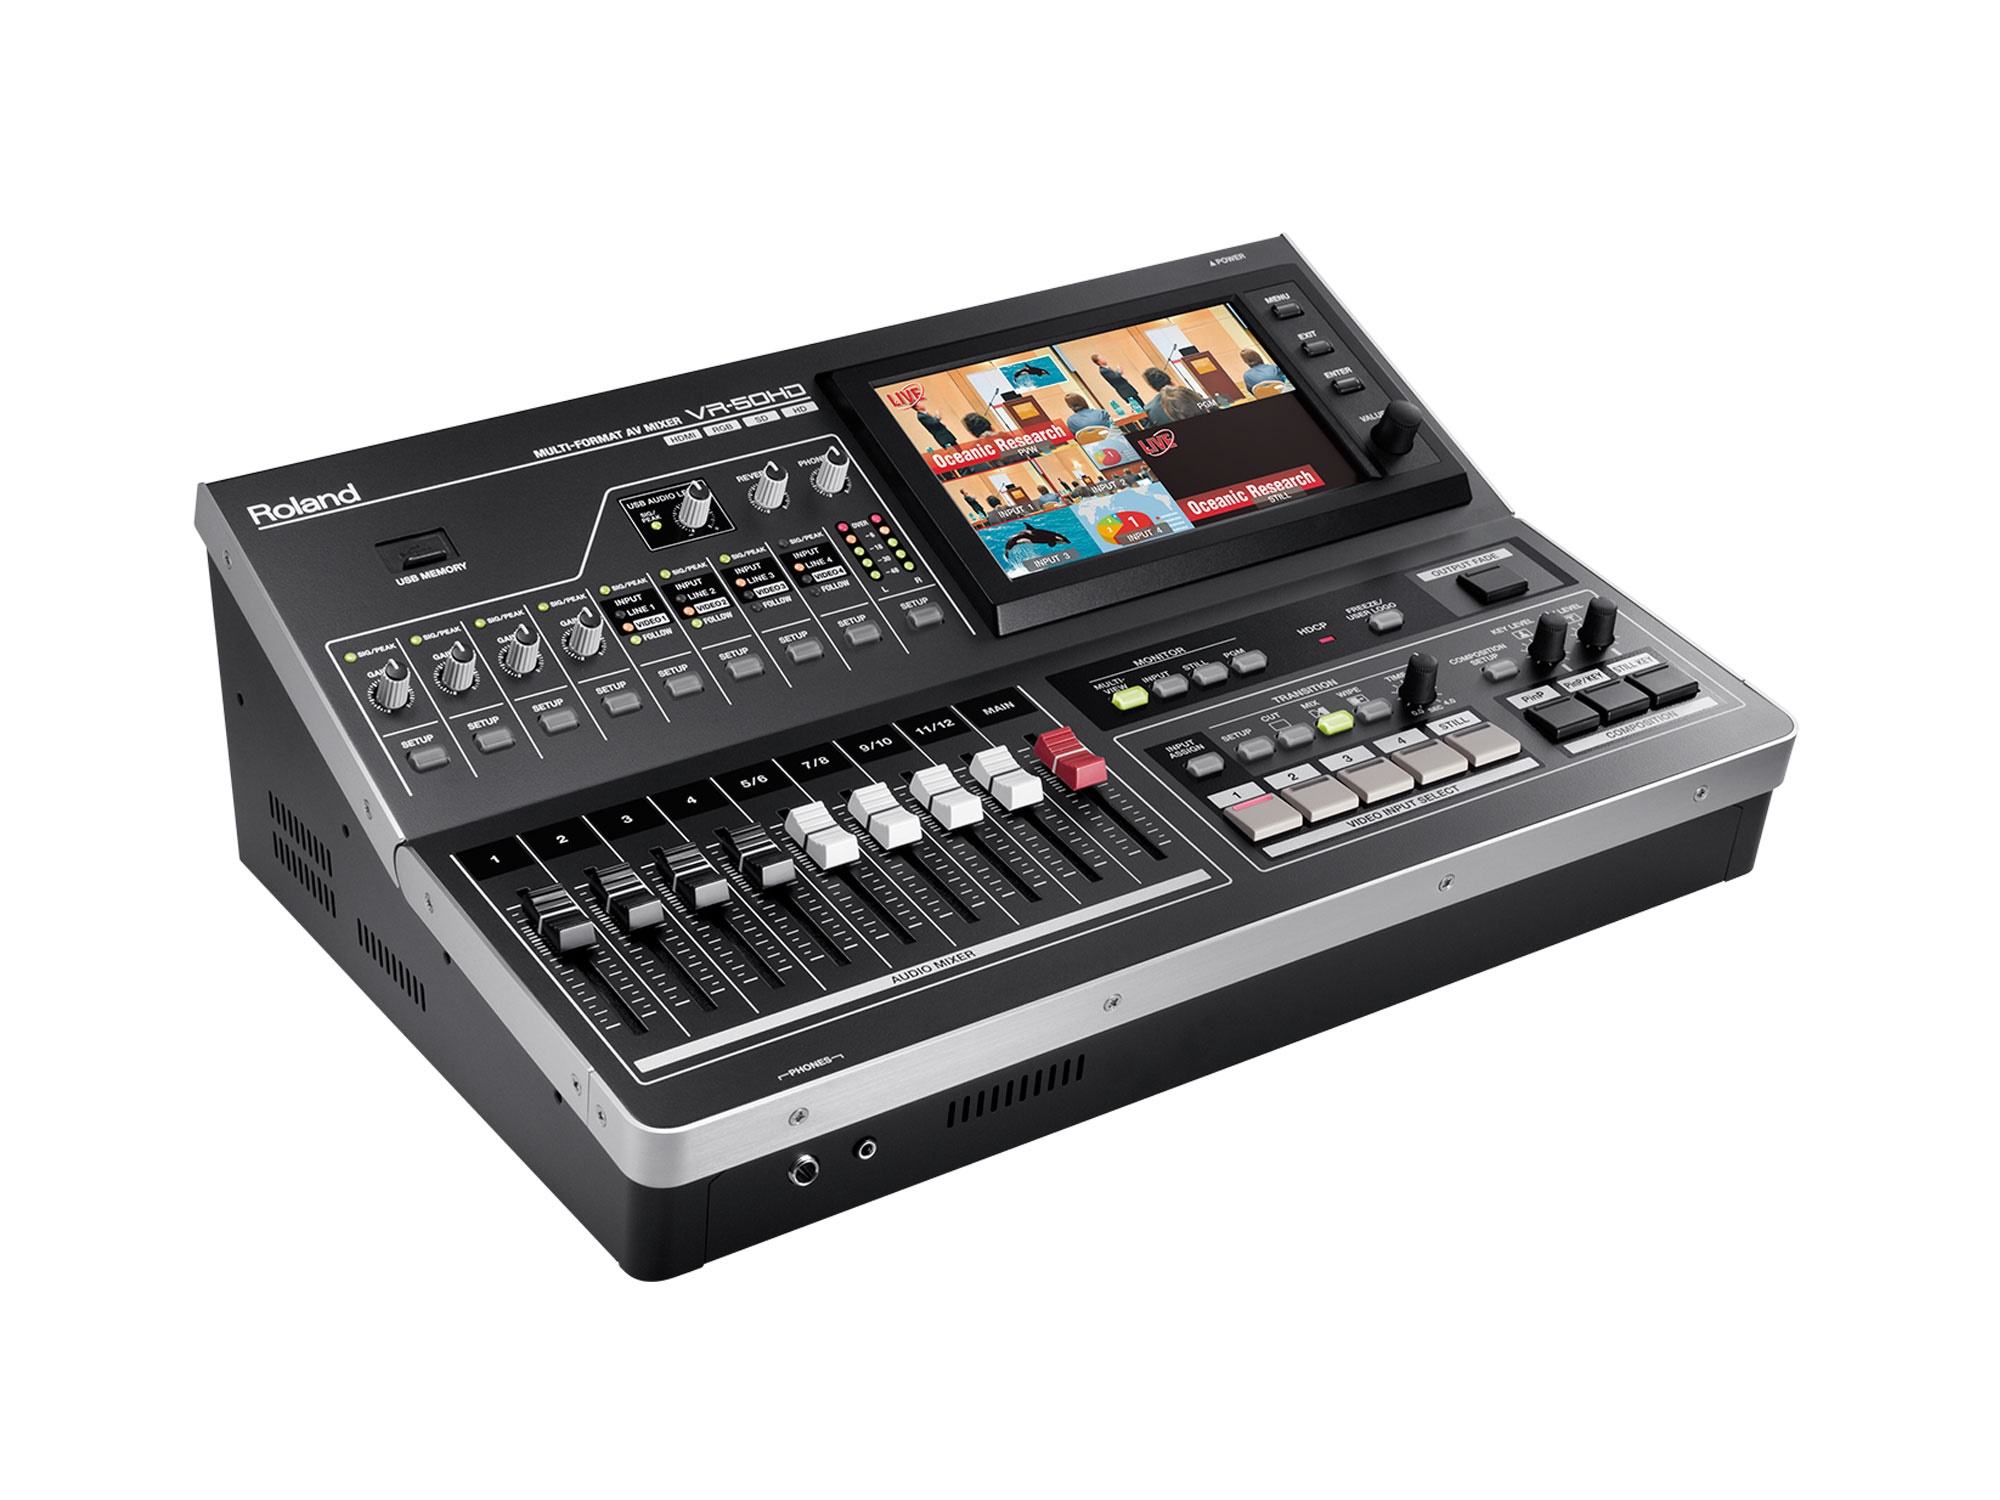 VR-50HD Multi-Format A/V Mixer with USB Stream/Record by Roland